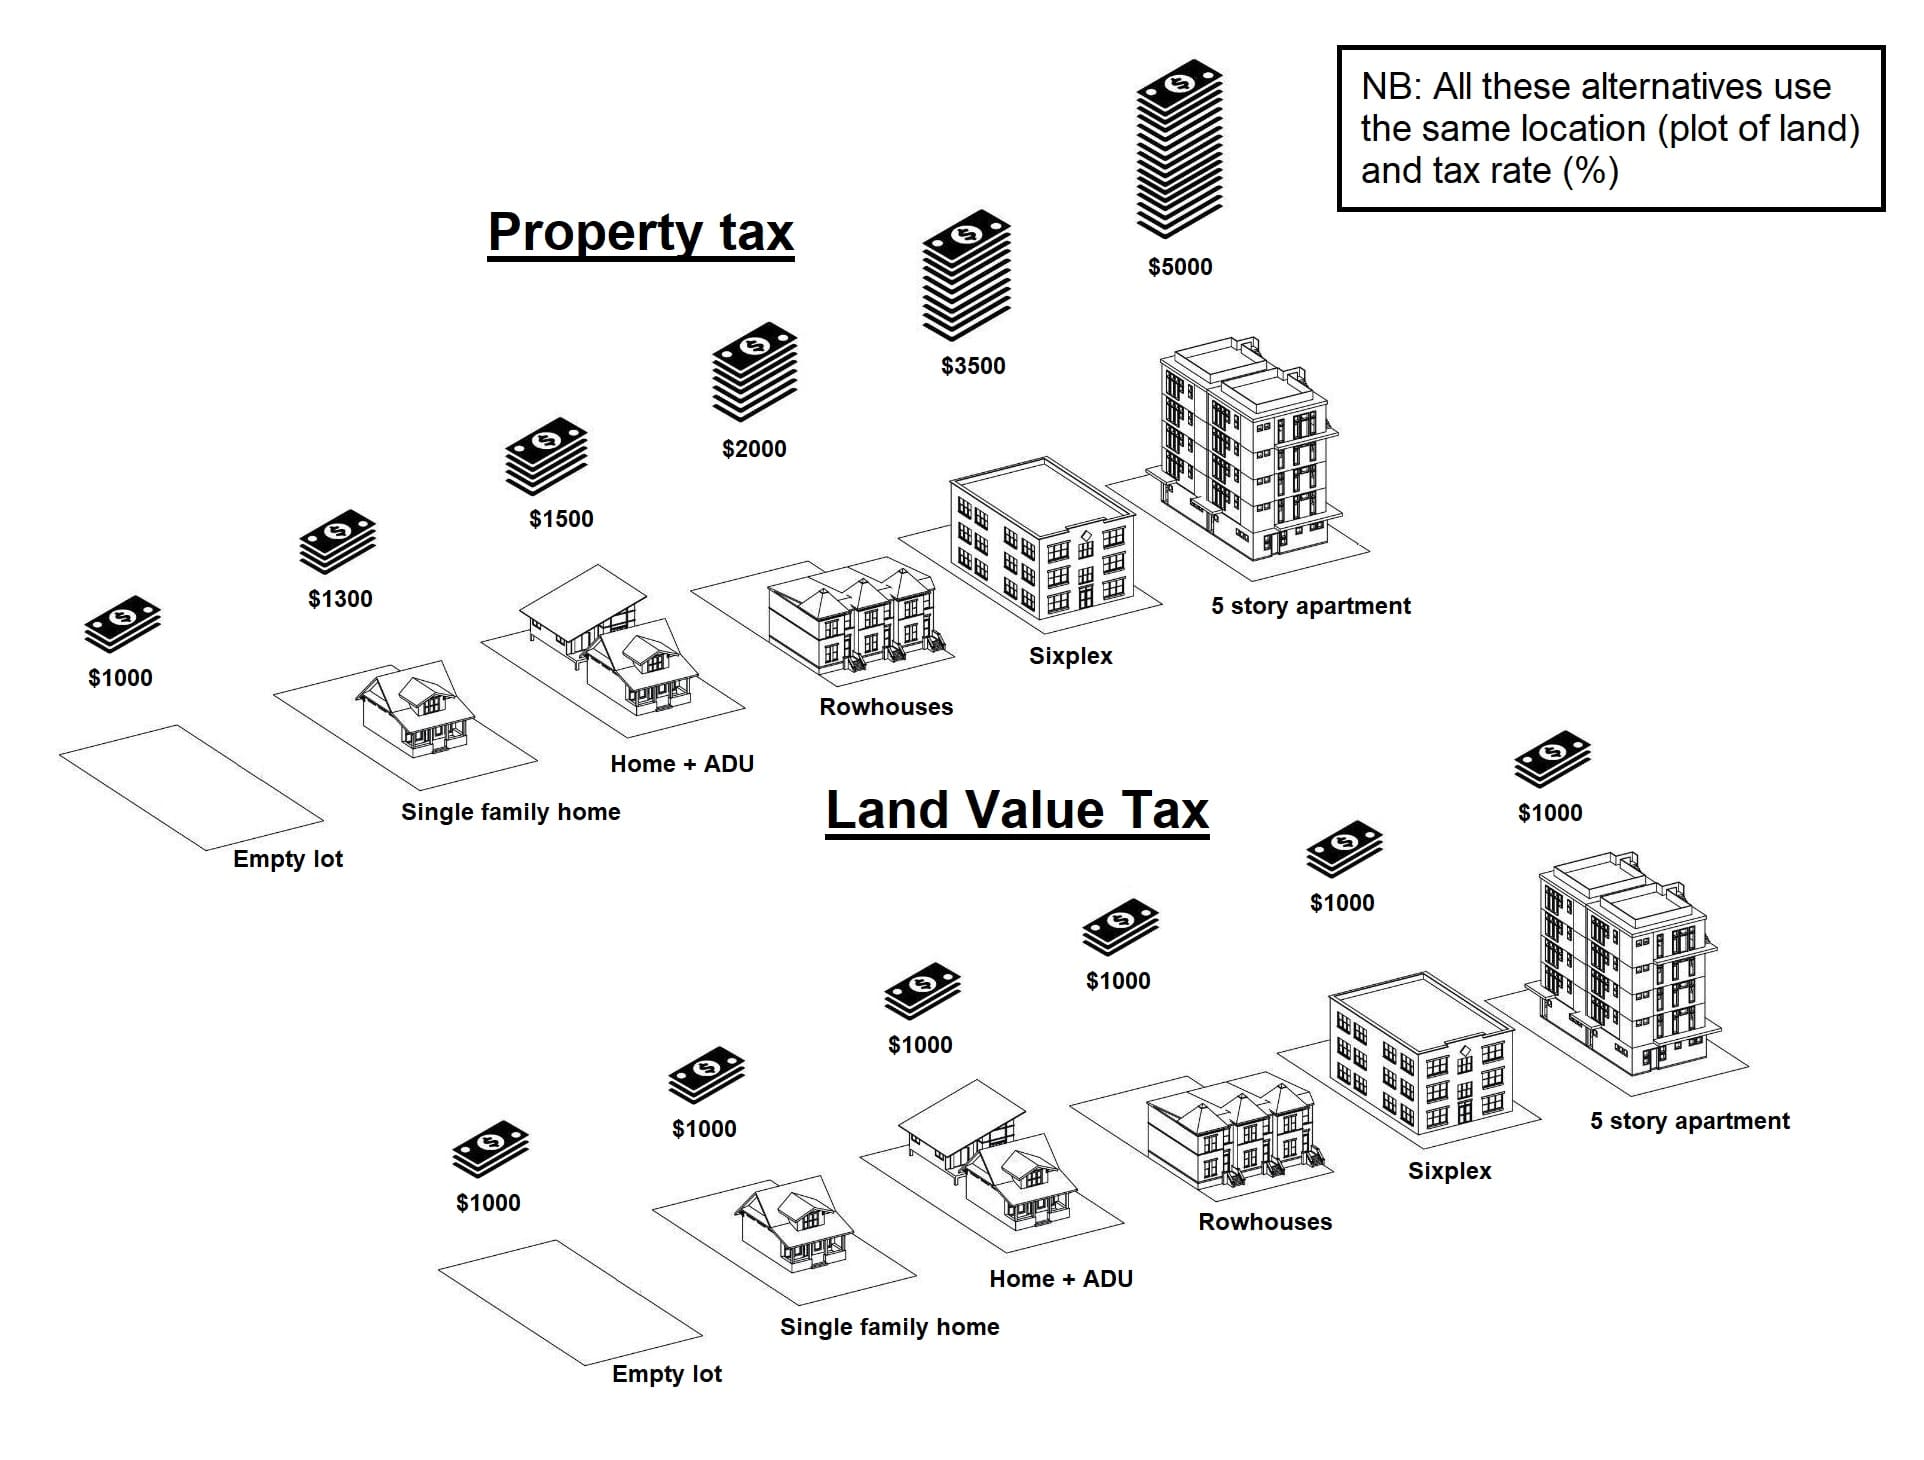 Comparison between land value taxes and property-taxes, based on land area and building size